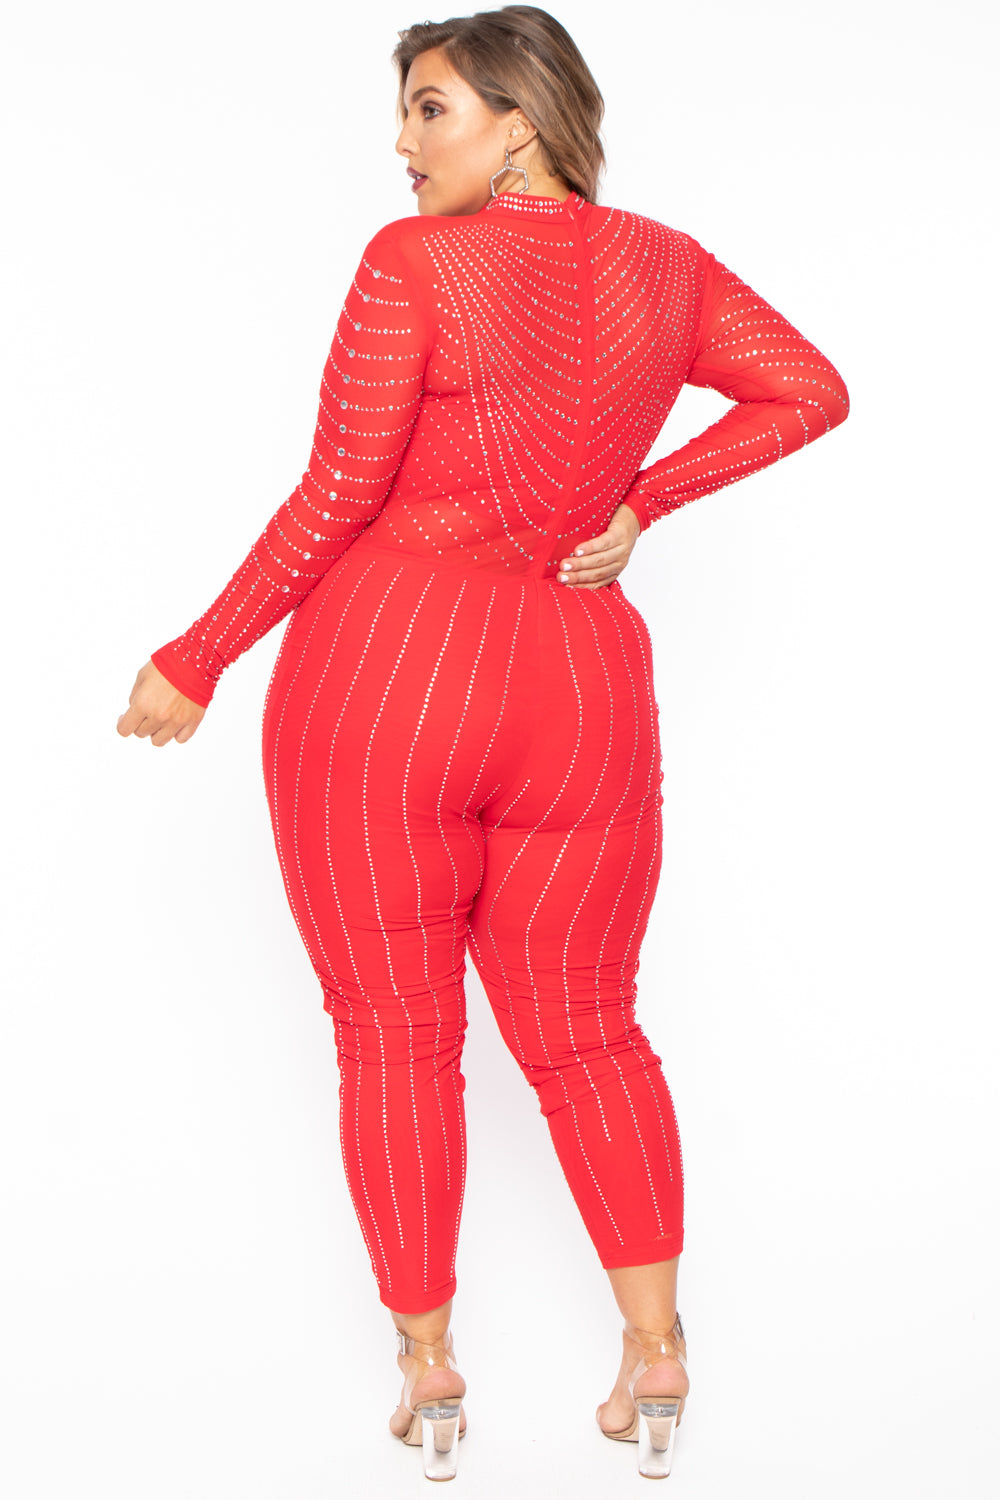 J OUR Jumpsuits and Rompers Plus Size 14K Sheer Mesh Rhinestone Jumpsuit - Red